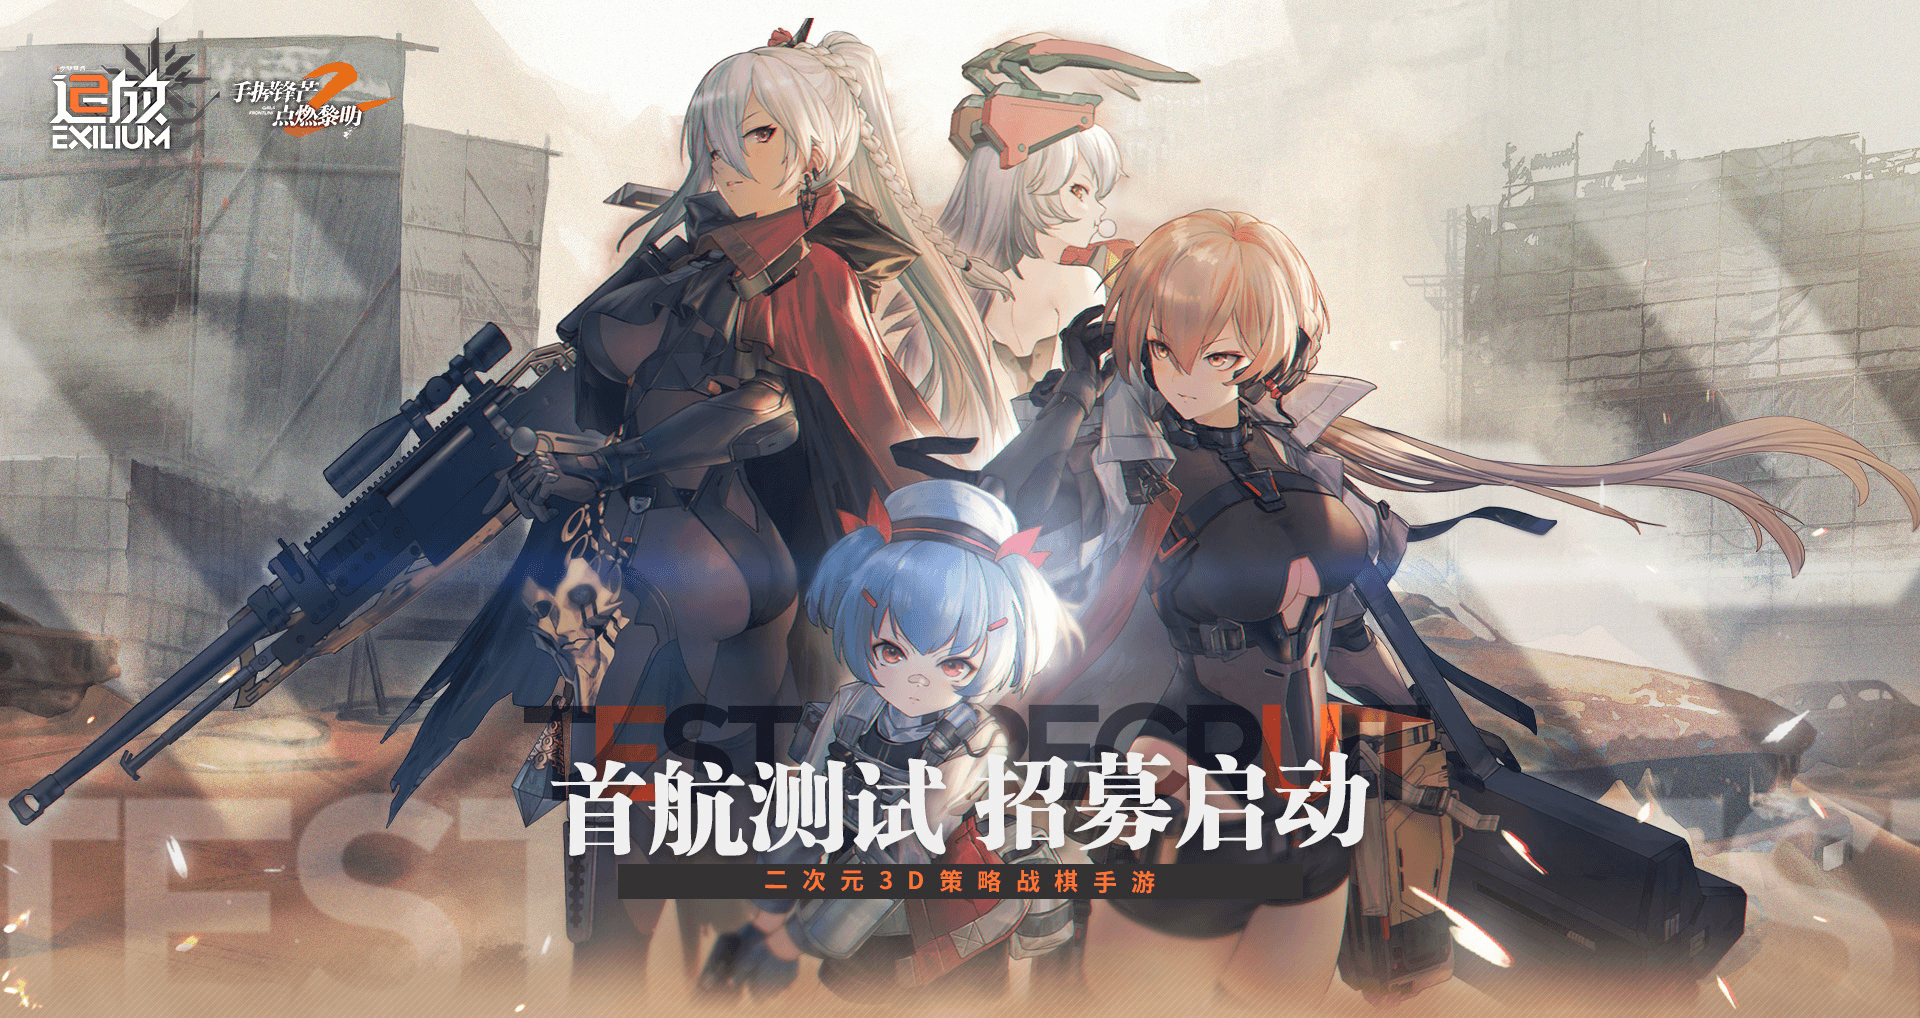 Signups for first Closed Beta Test for Girls' Frontline II: Exilium have opened! For instructions on how to apply, please check out this page. Playtesting will start on June 29th and end on July 3rd. 